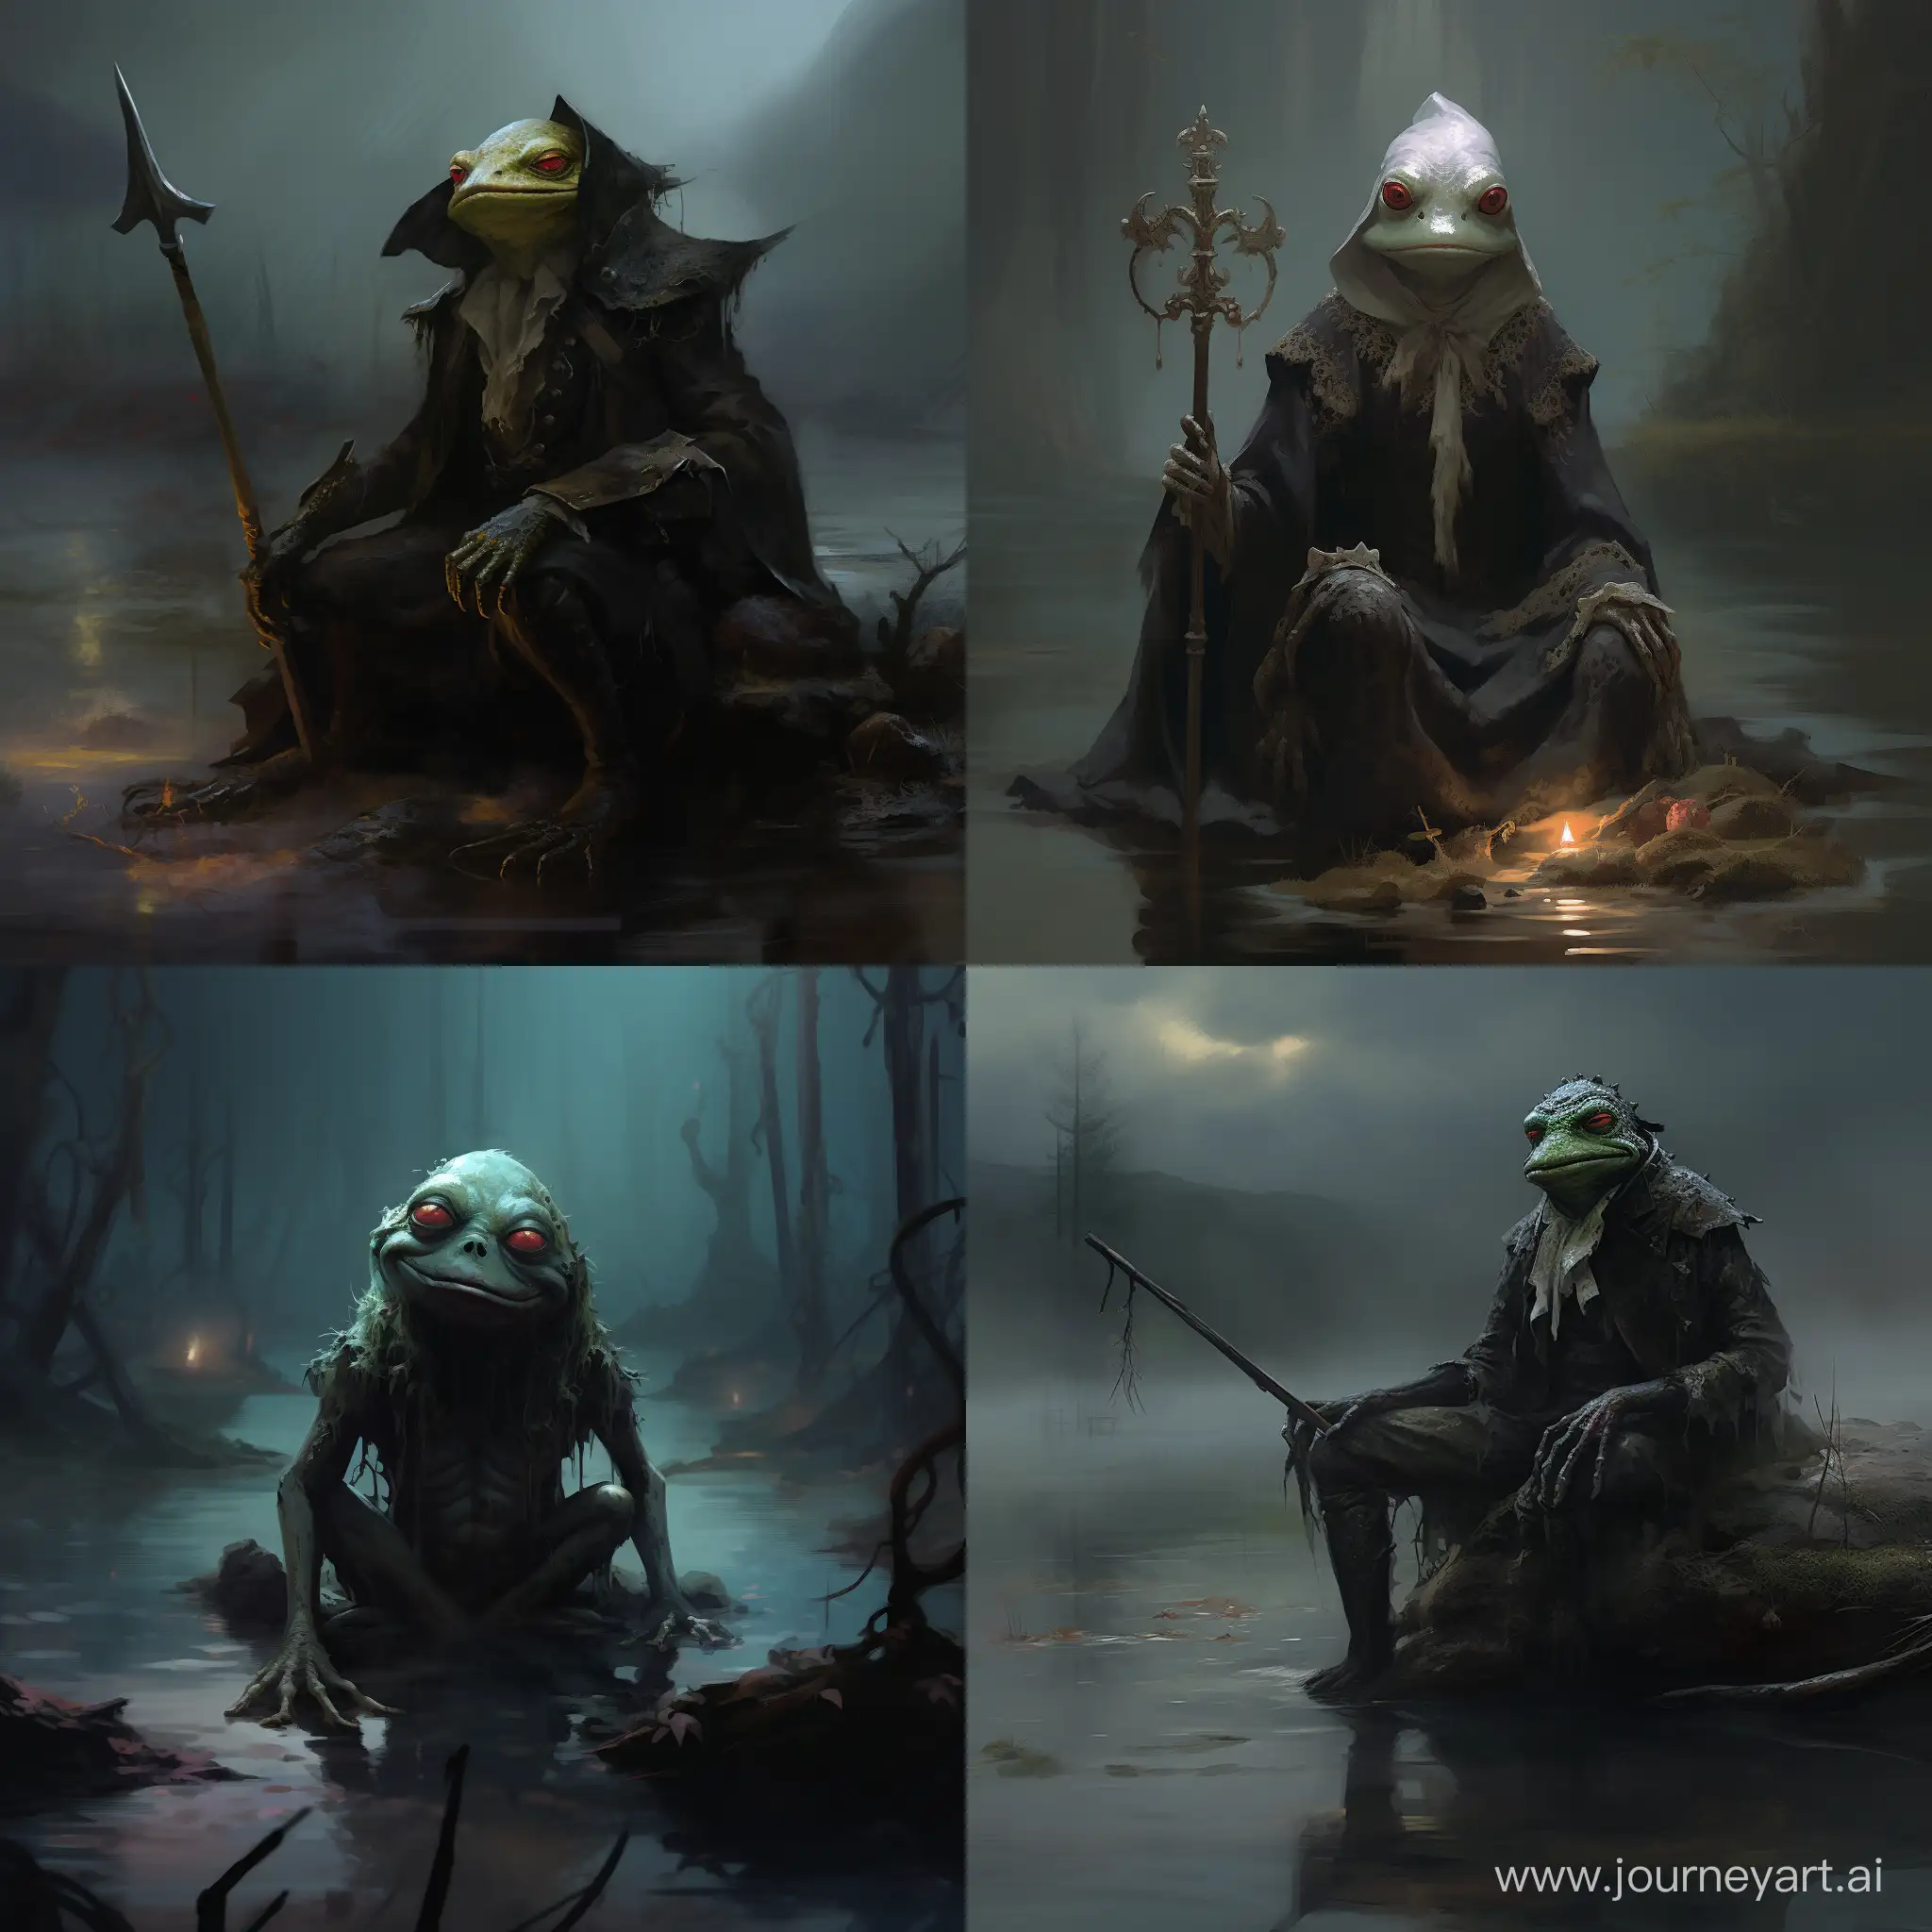 Enigmatic-Curse-Mysterious-Dark-Art-Depicting-a-Cursed-Frog